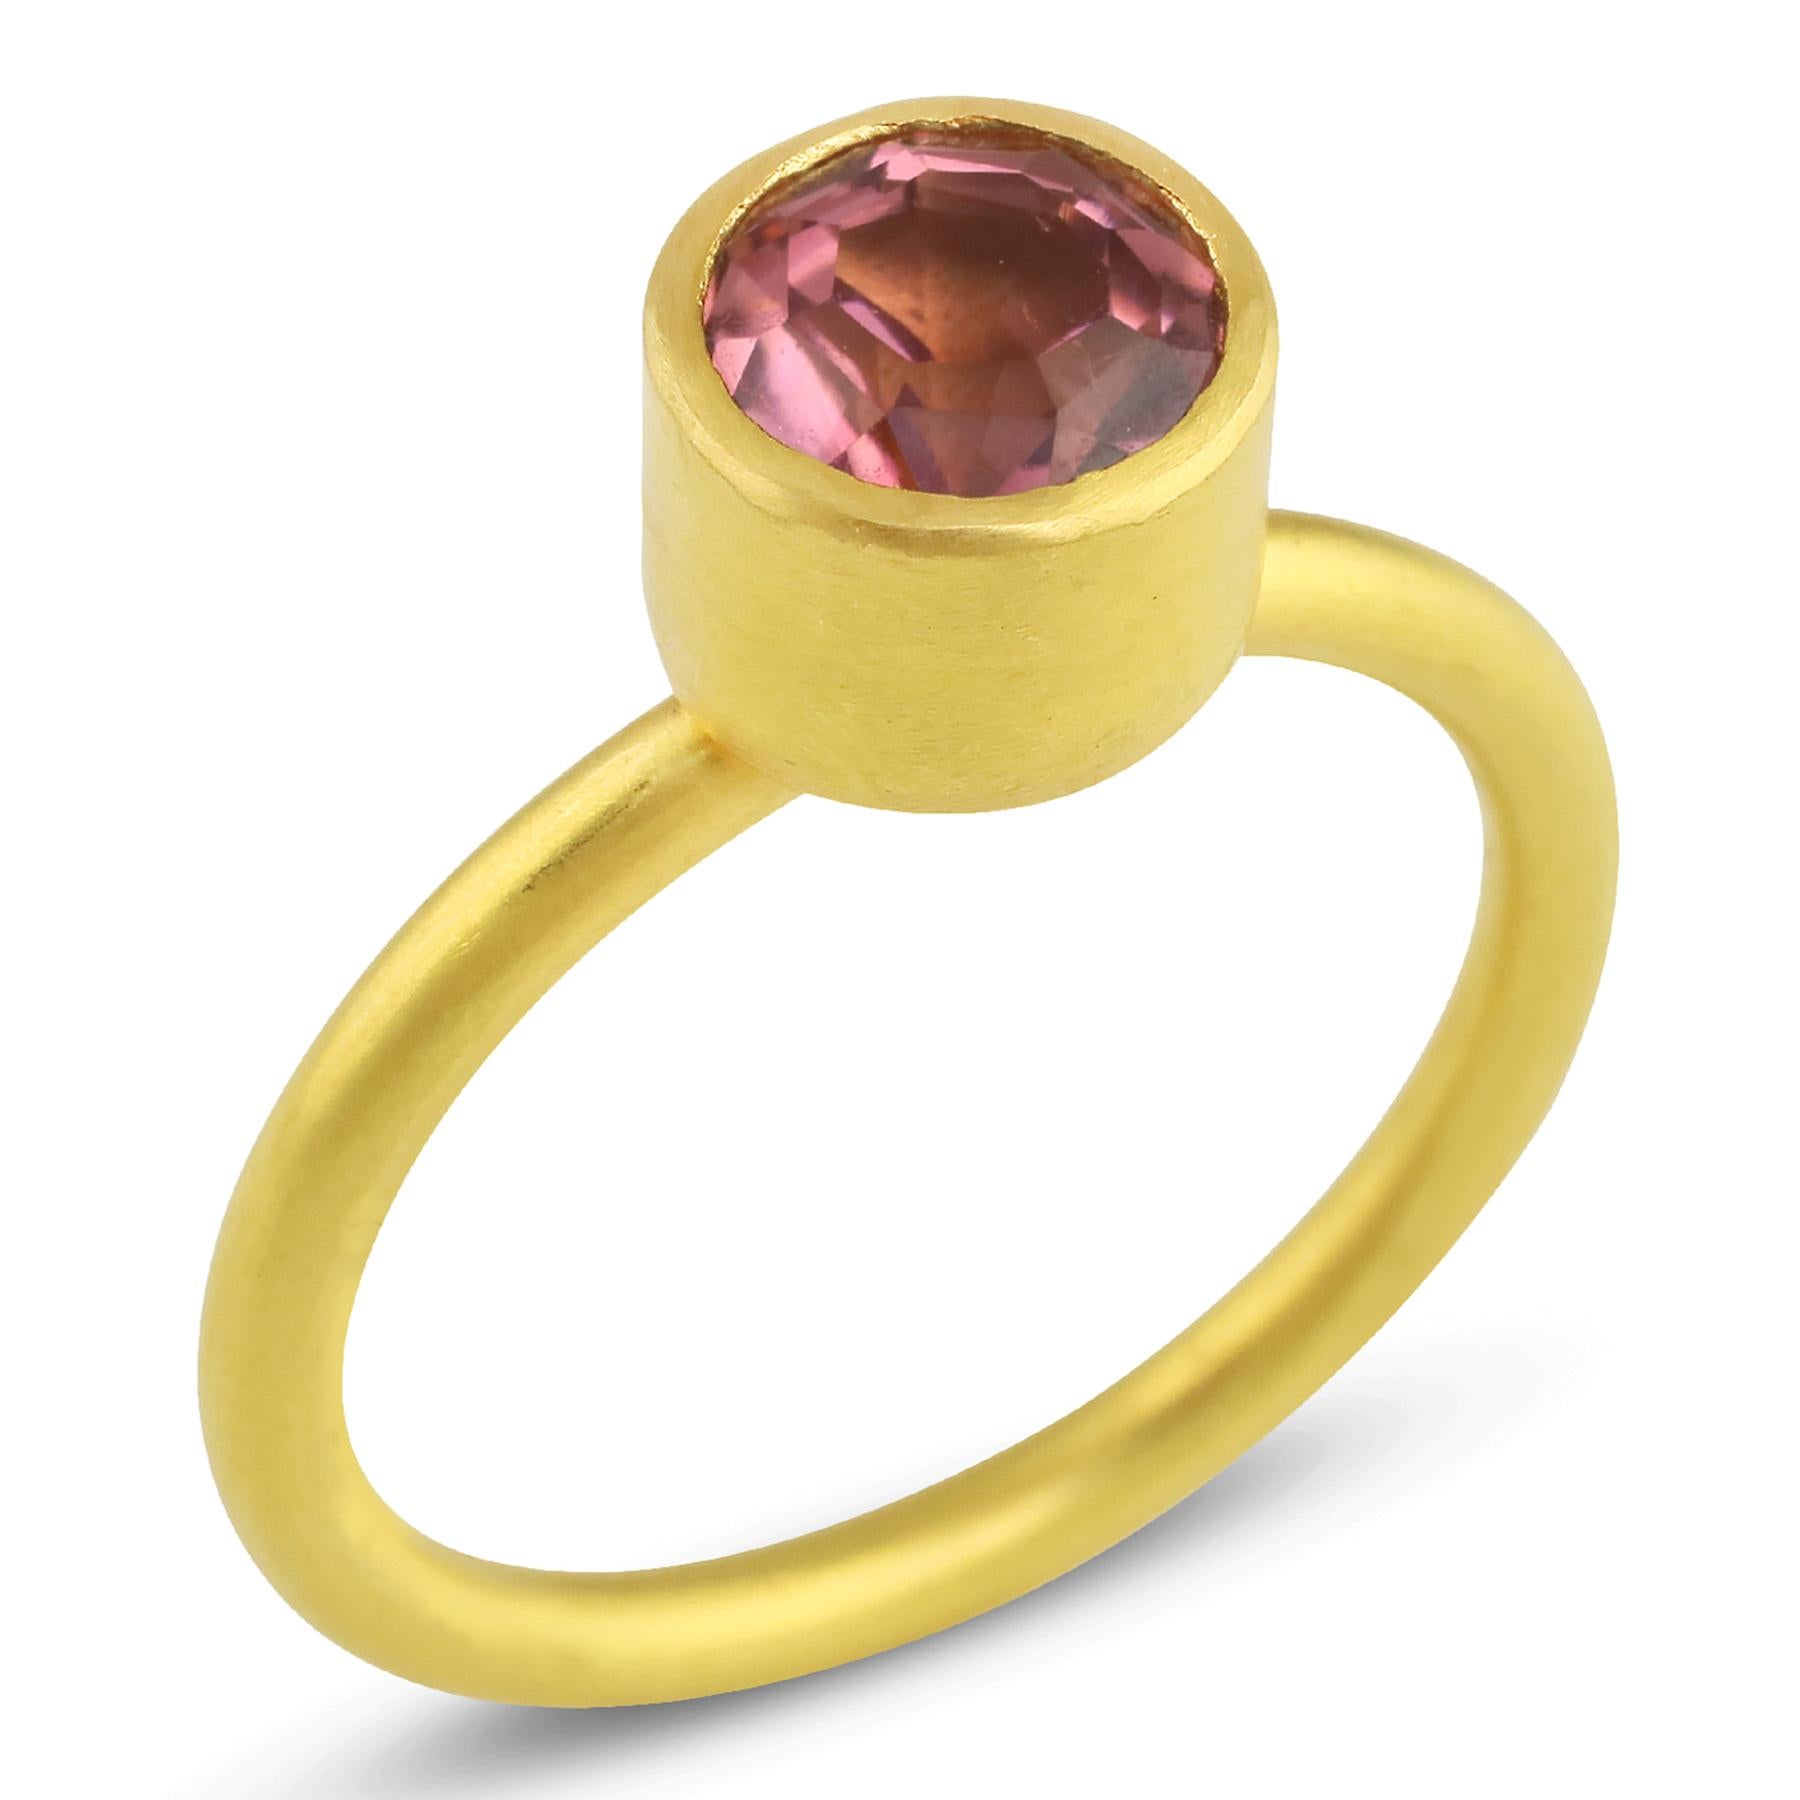 PHILIPPE SPENCER - 1.85 Ct. Bright Pink Tourmaline wrapped in Pure 22K Gold Bezel with 20K Gold Round Matted Ring. Brushed Finish. Suitable for nesting. Size 6 3/4, and is in-stock and ready to ship. Our apologies in advance, this One-Of-A-Kind